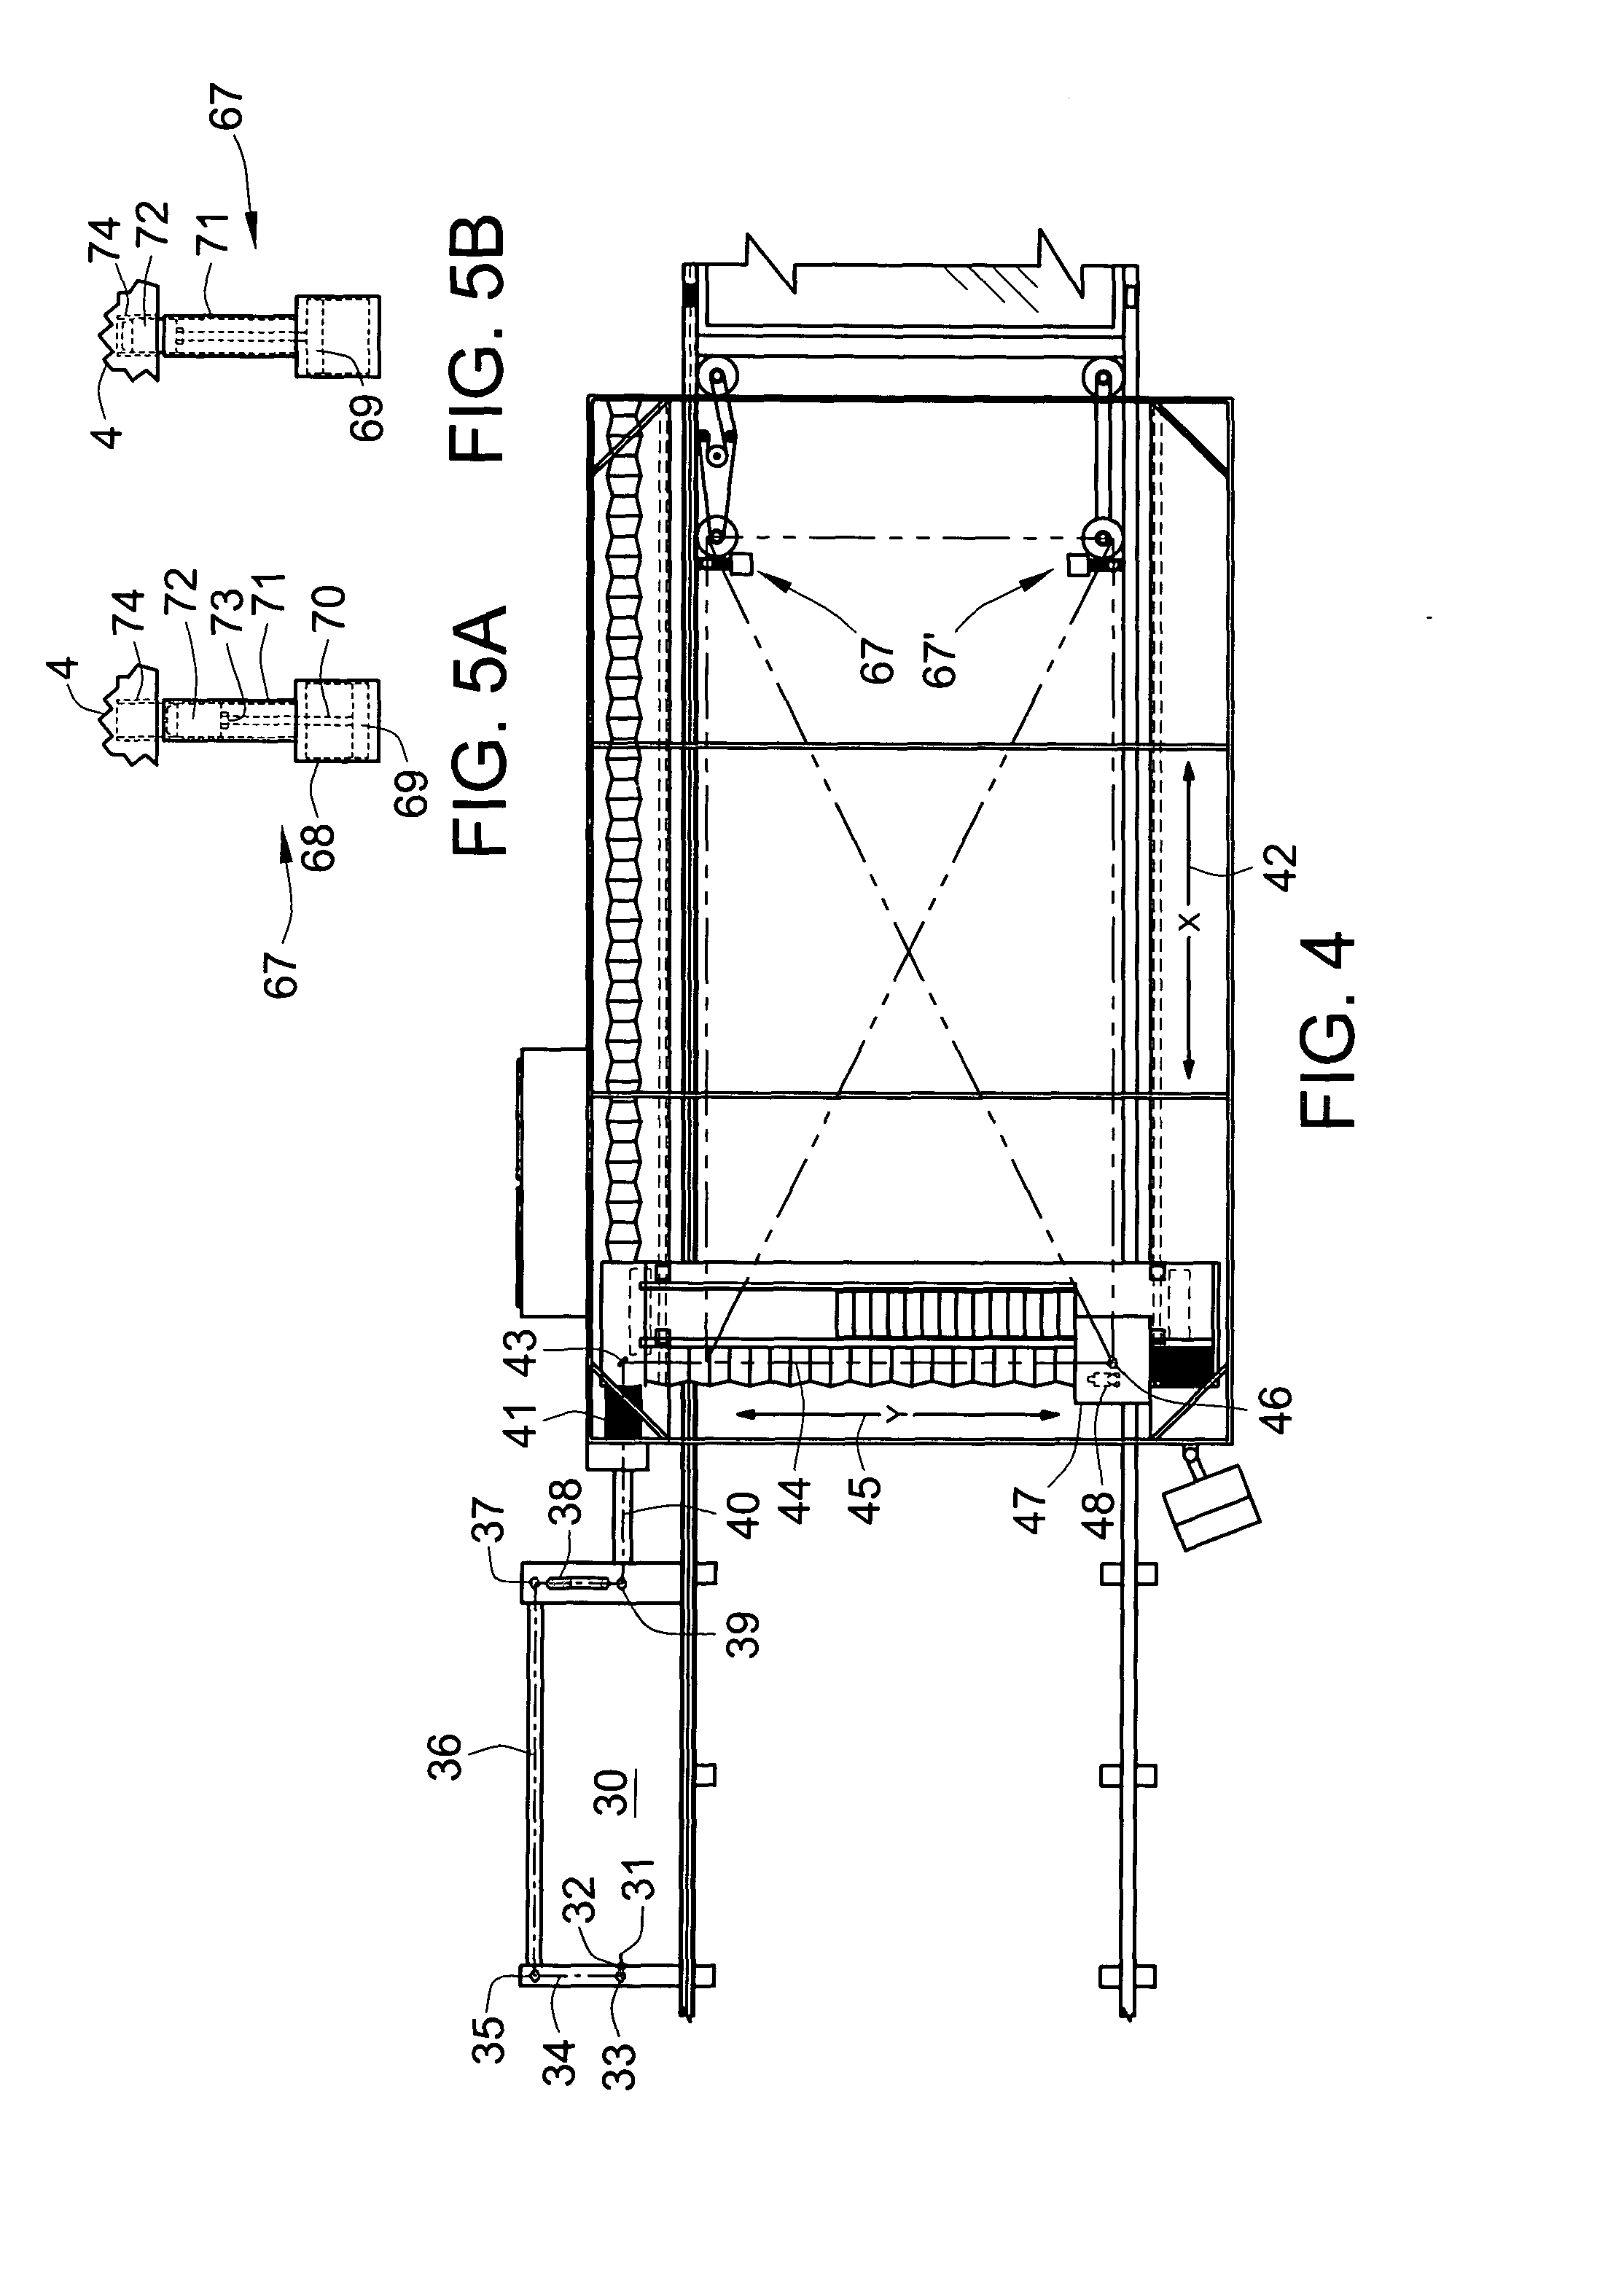 Laser machine tool with image sensor for registration of workhead guidance system